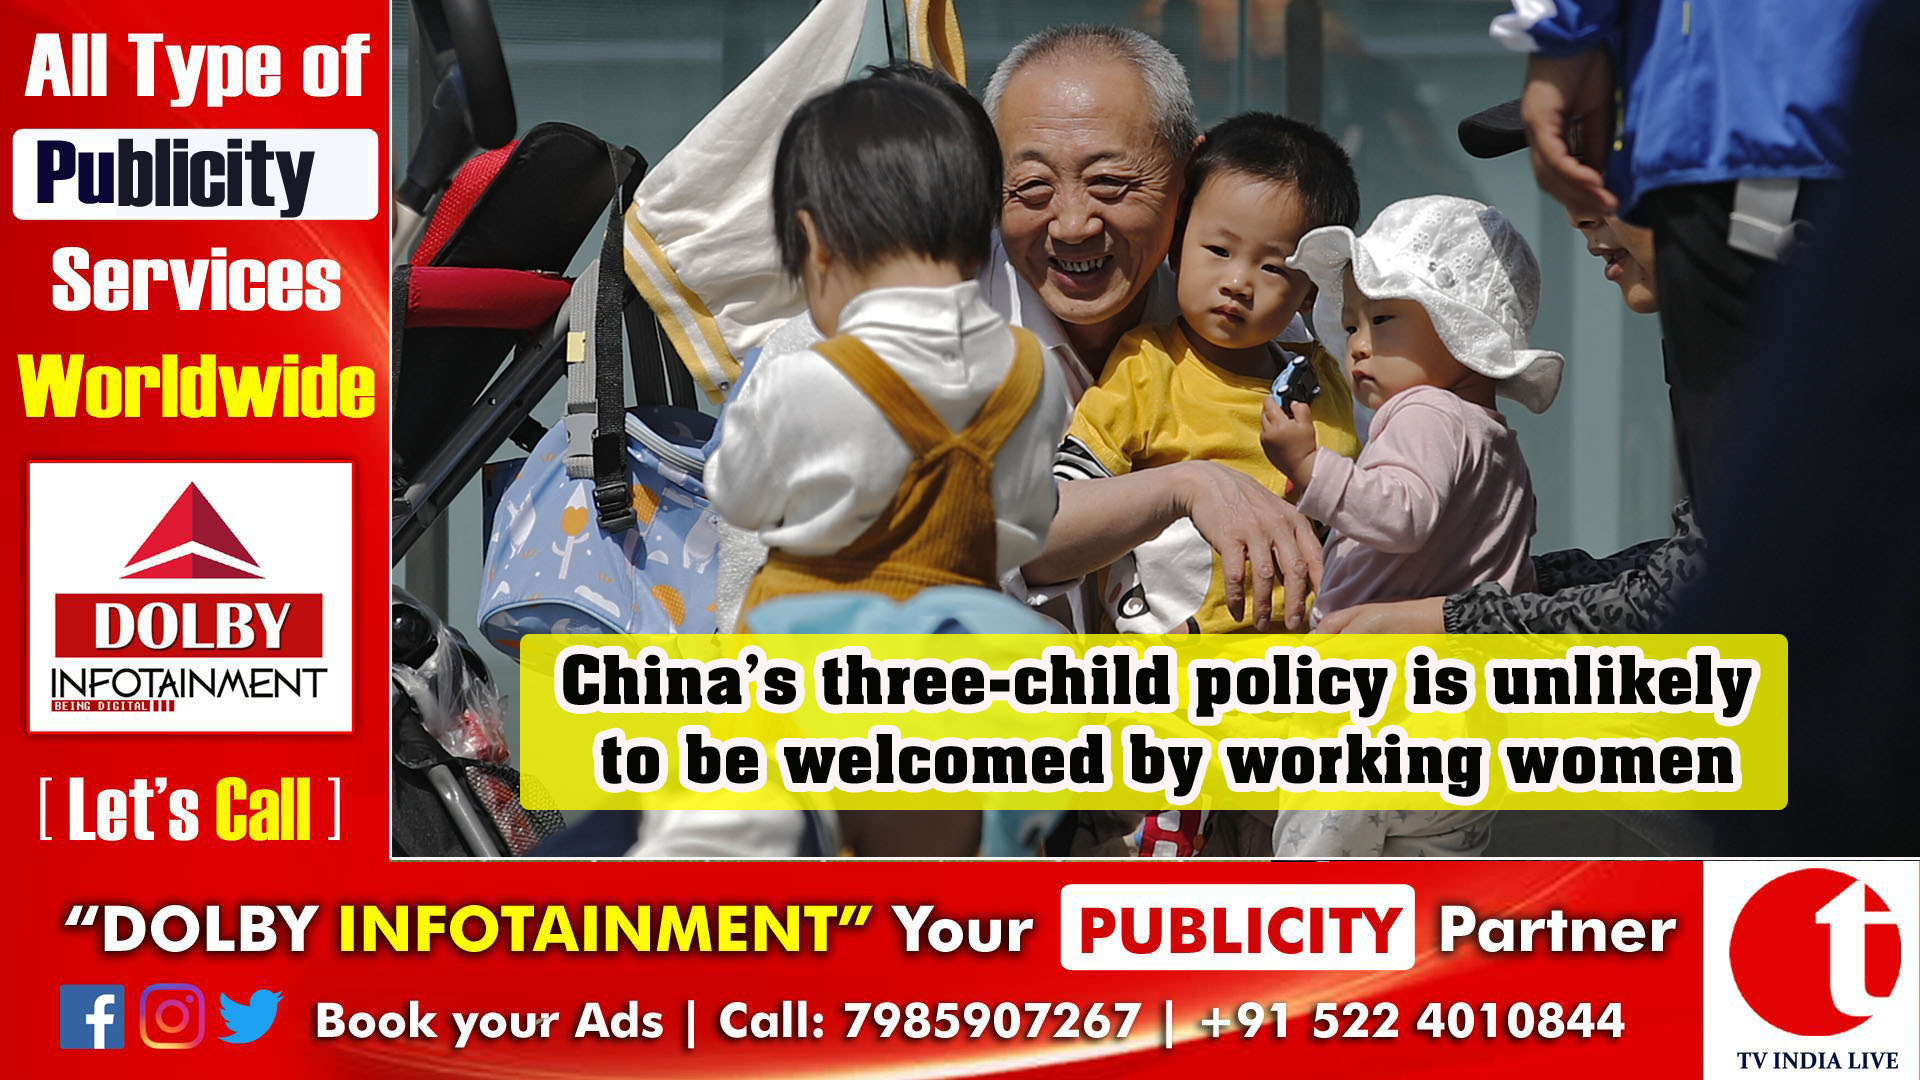 China’s three-child policy is unlikely to be welcomed by working women